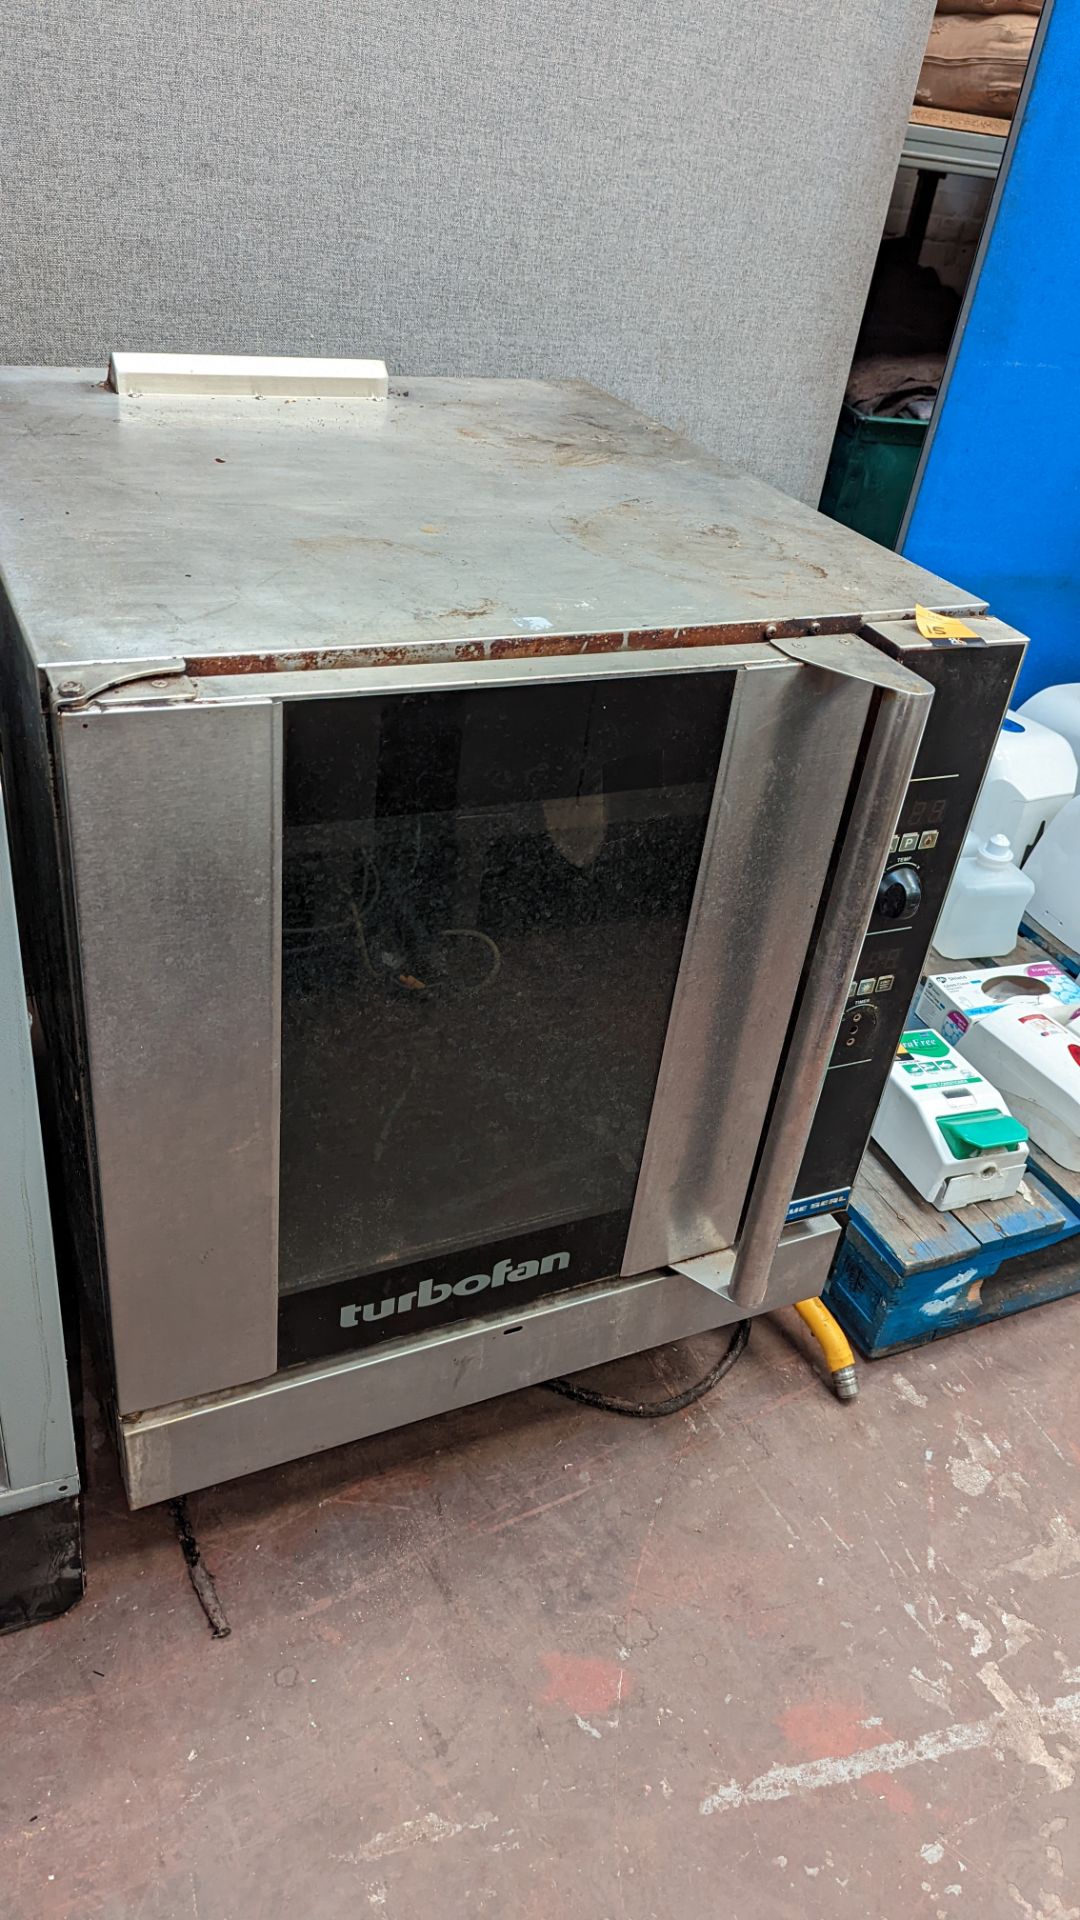 Turbo fan gas oven - Image 8 of 9